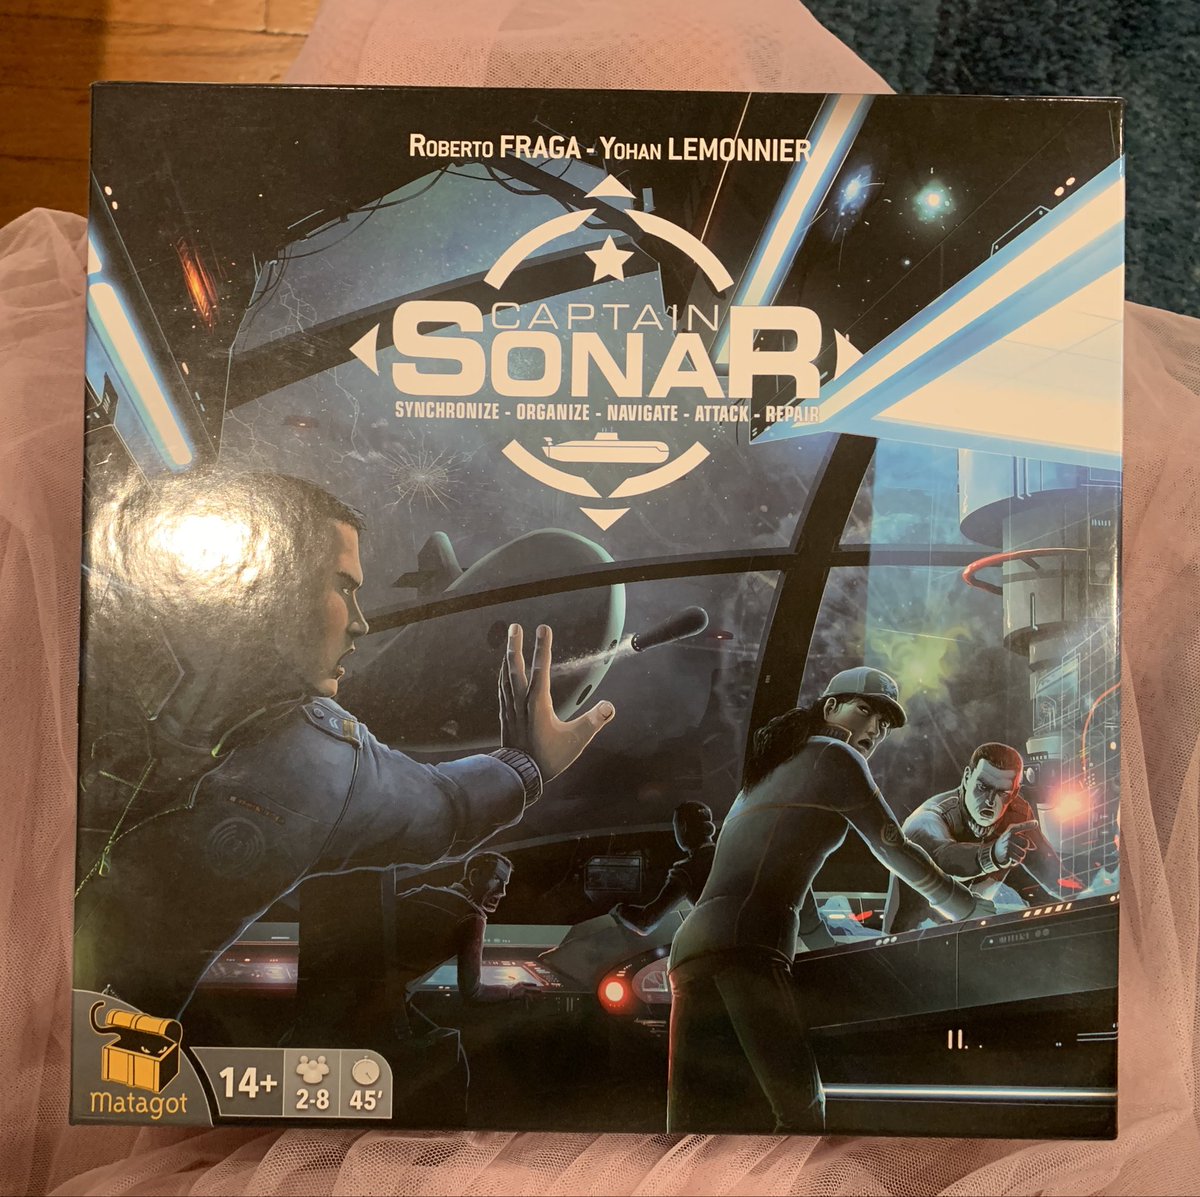 CAPTAIN SONAR: look this game is fun but do you know how hard it is to get EIGHT PEOPLE together for a board games they don’t already know how to play??? 1/5 this game taunts me